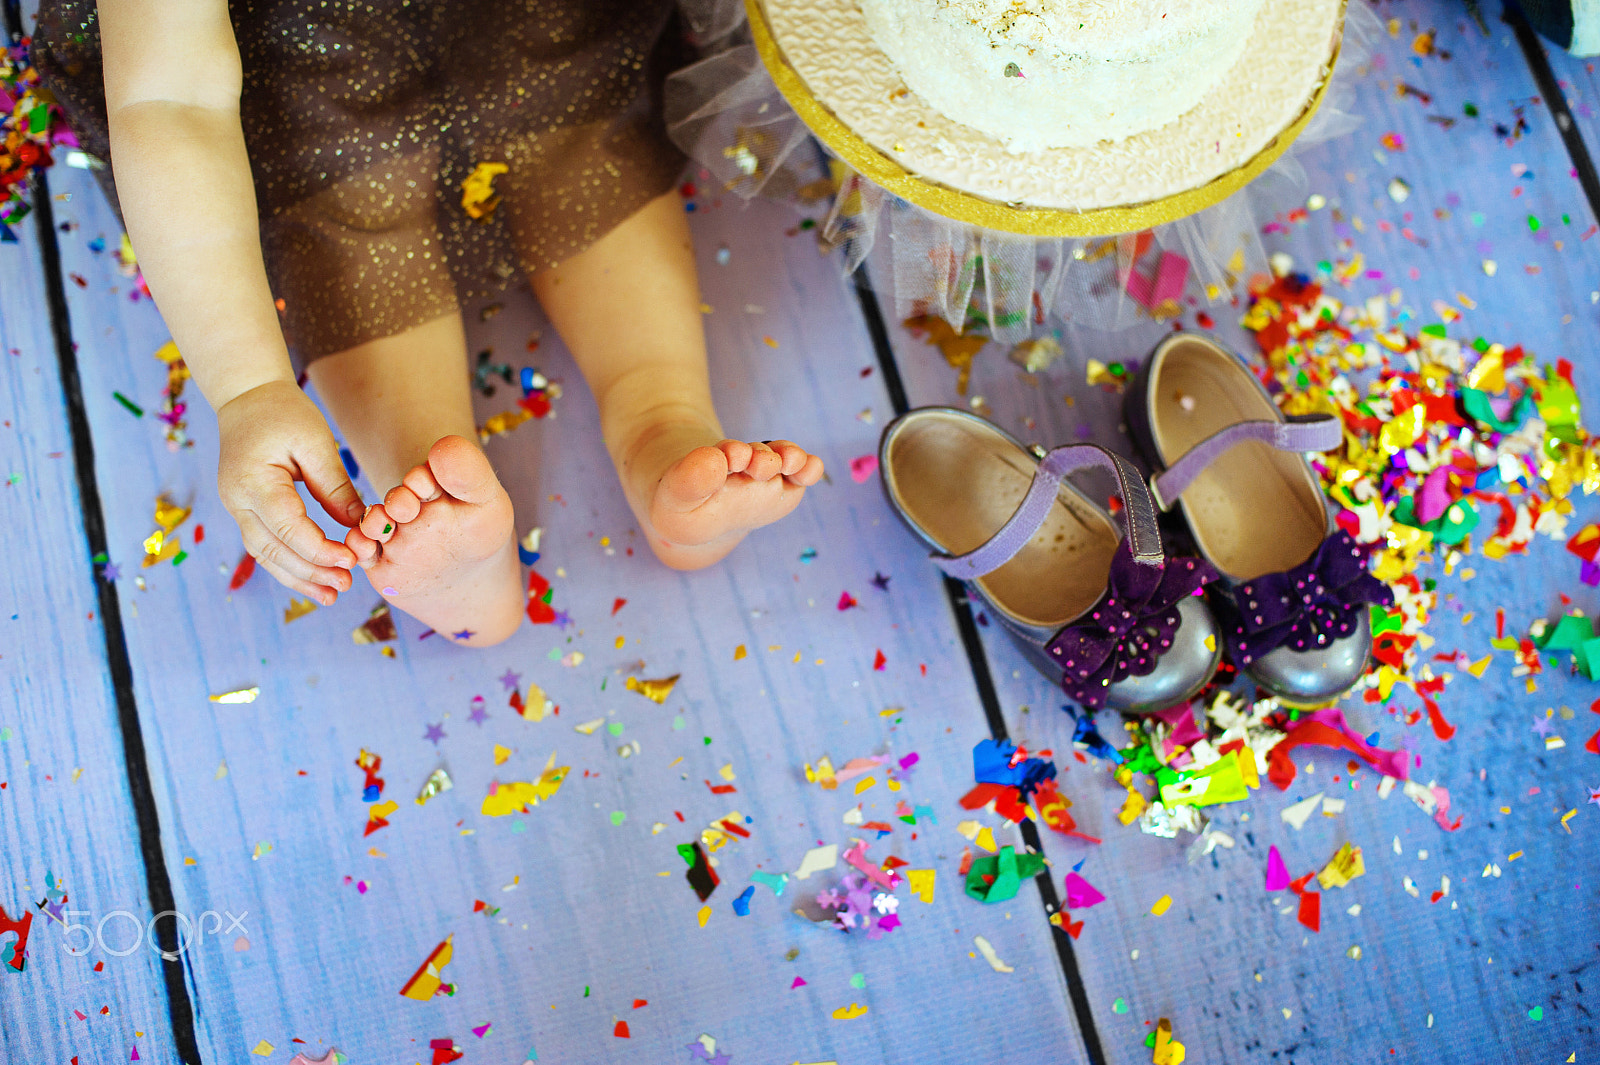 Nikon D700 + Nikon AF Nikkor 50mm F1.4D sample photo. Kid barefooted legs in against the confetti and garlands - selective focus, copy space photography